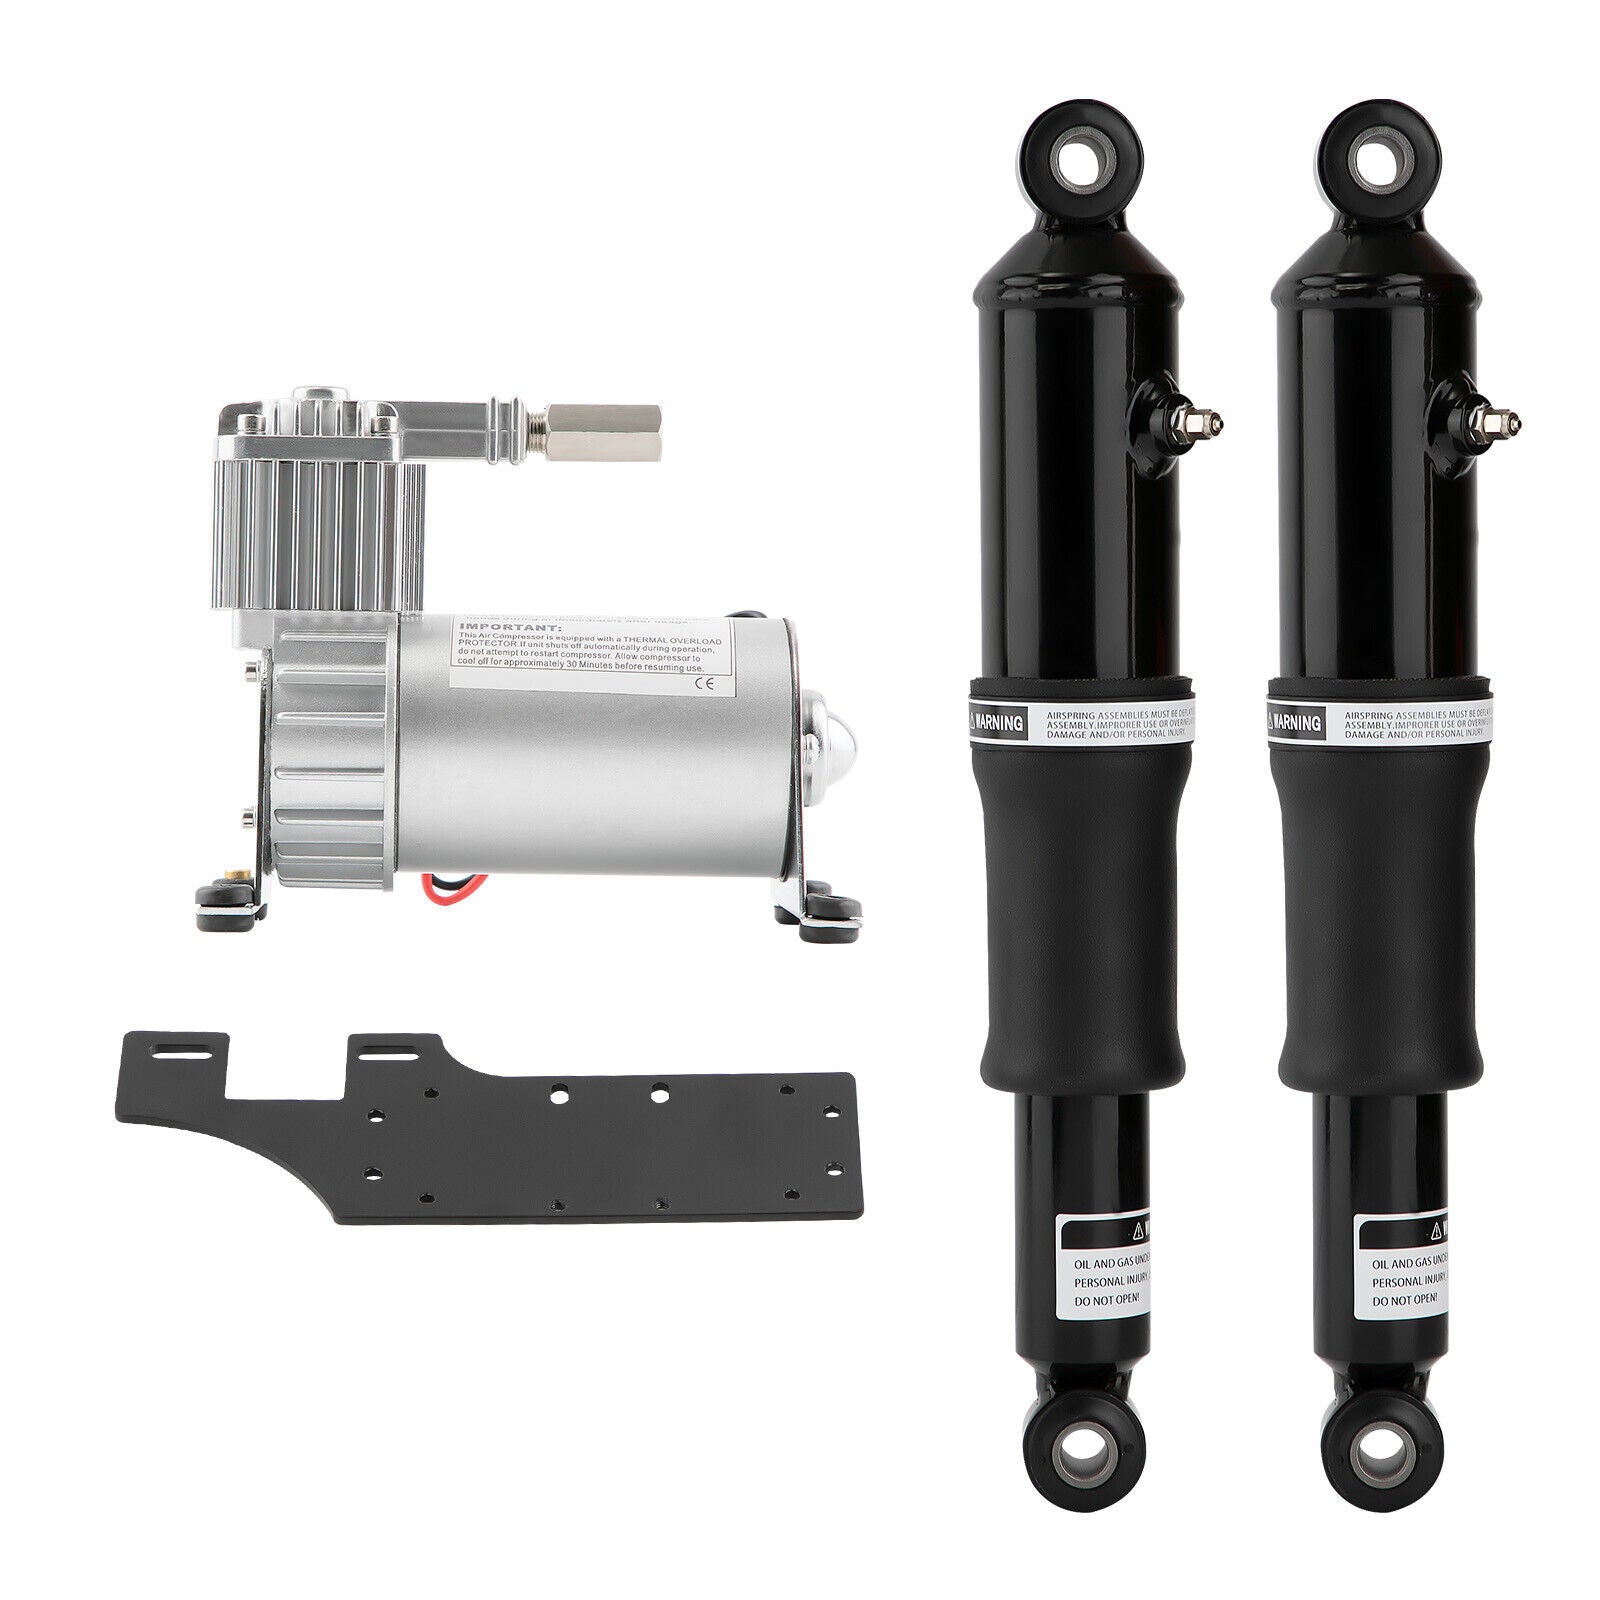 PREMIUM Rear Air Ride Suspension Set For Harley Touring Road King Street Glide 1994-2018